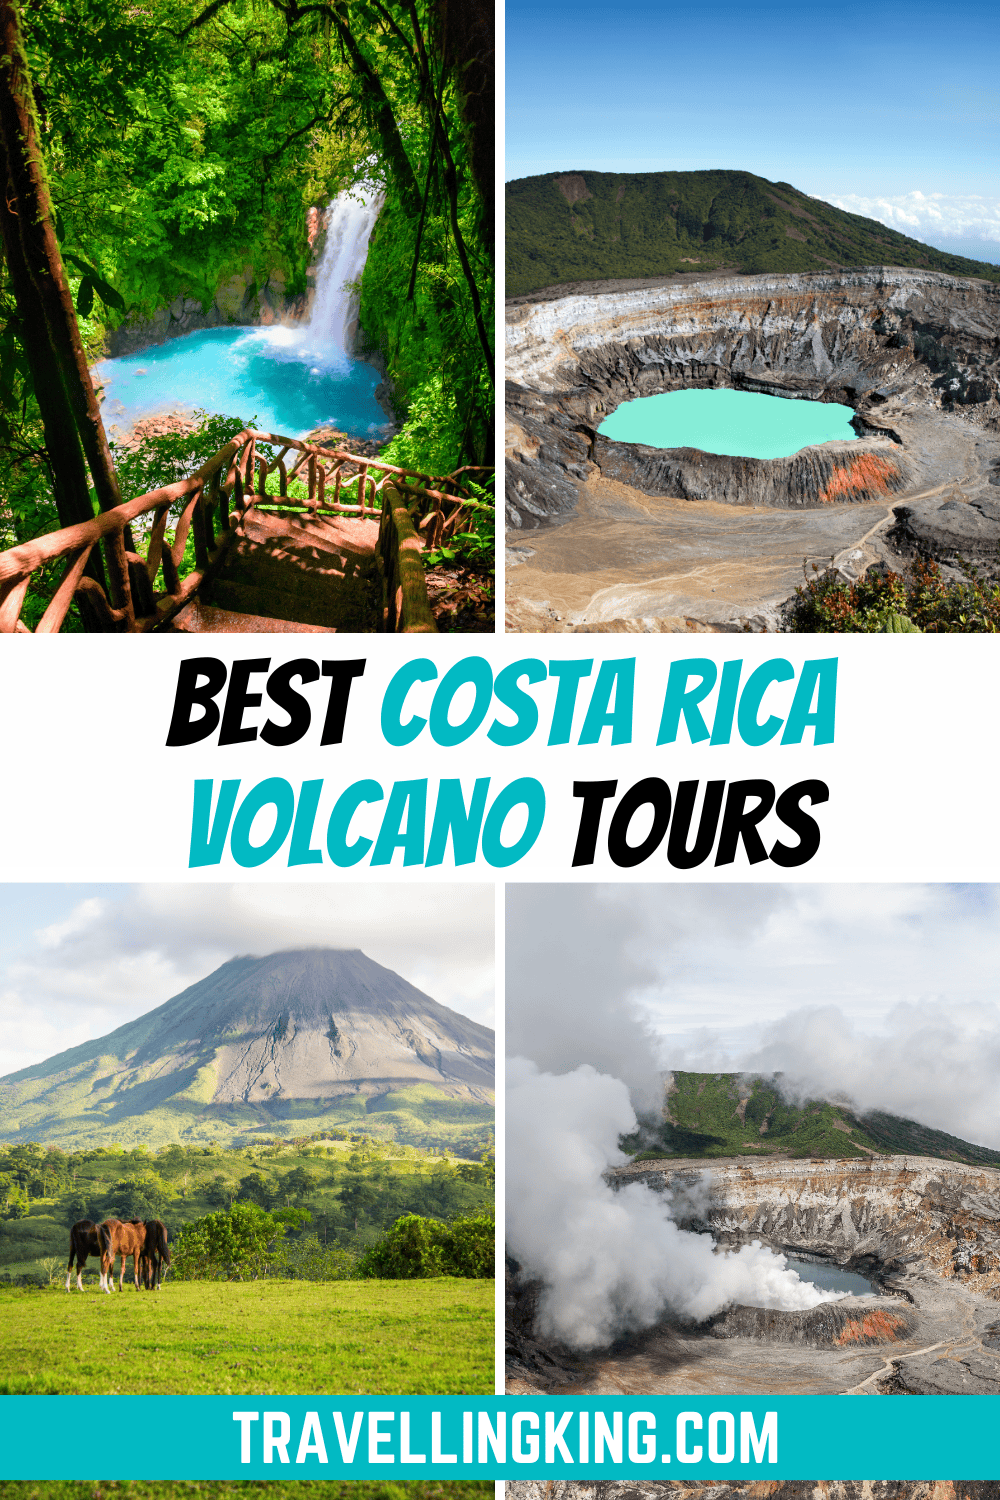 12 Of The Best Costa Rica Volcano Tours